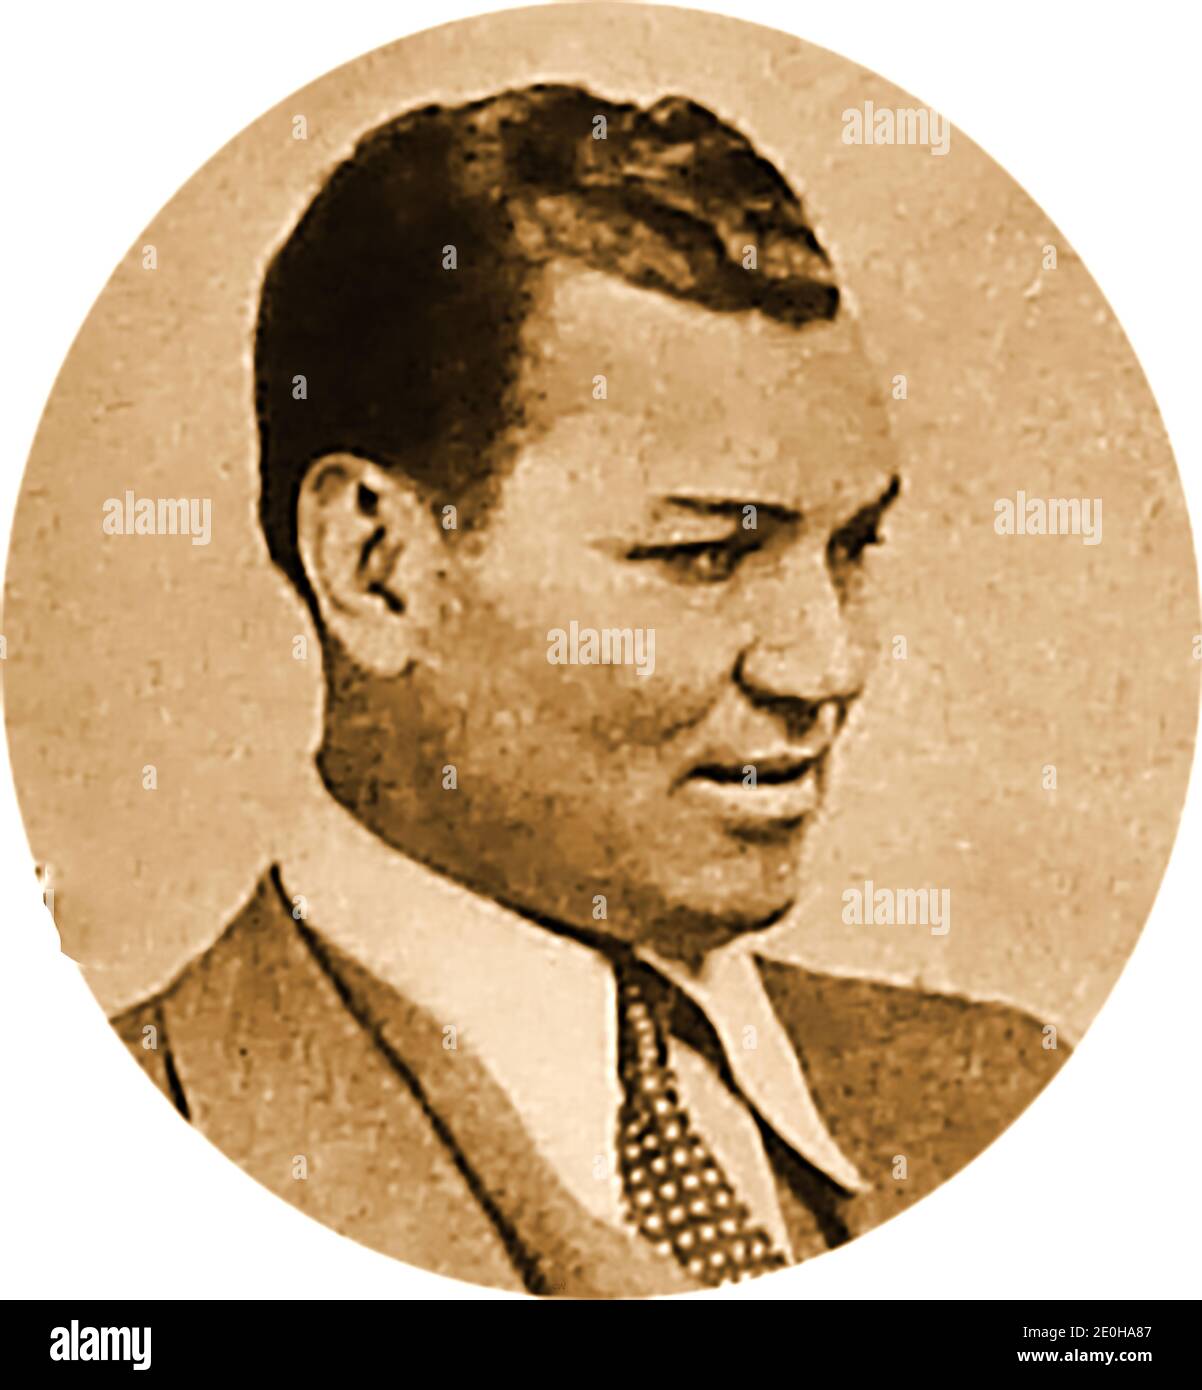 An early portrait of American professional heavyweight boxing champion Jack Dempsey,   -----  Full name  William Harrison 'Jack' Dempsey (1895 –  1983). He was nicknamed Kid Blackie, Young Dempsey or the Manassa Mauler .He  competed from 1914 to 1927, reigning as the world heavyweight champion from 1919 to 1926 and becoming a  cultural icon of the 1920s. He  pioneered the live broadcast of sporting & boxing events. There are some rumours  of  alleged Romanian origins, giving his real name as Teodor Domșa. The  only boxer ever to beat Dempsey by a knockout was Fireman Jim Flynn. Stock Photo